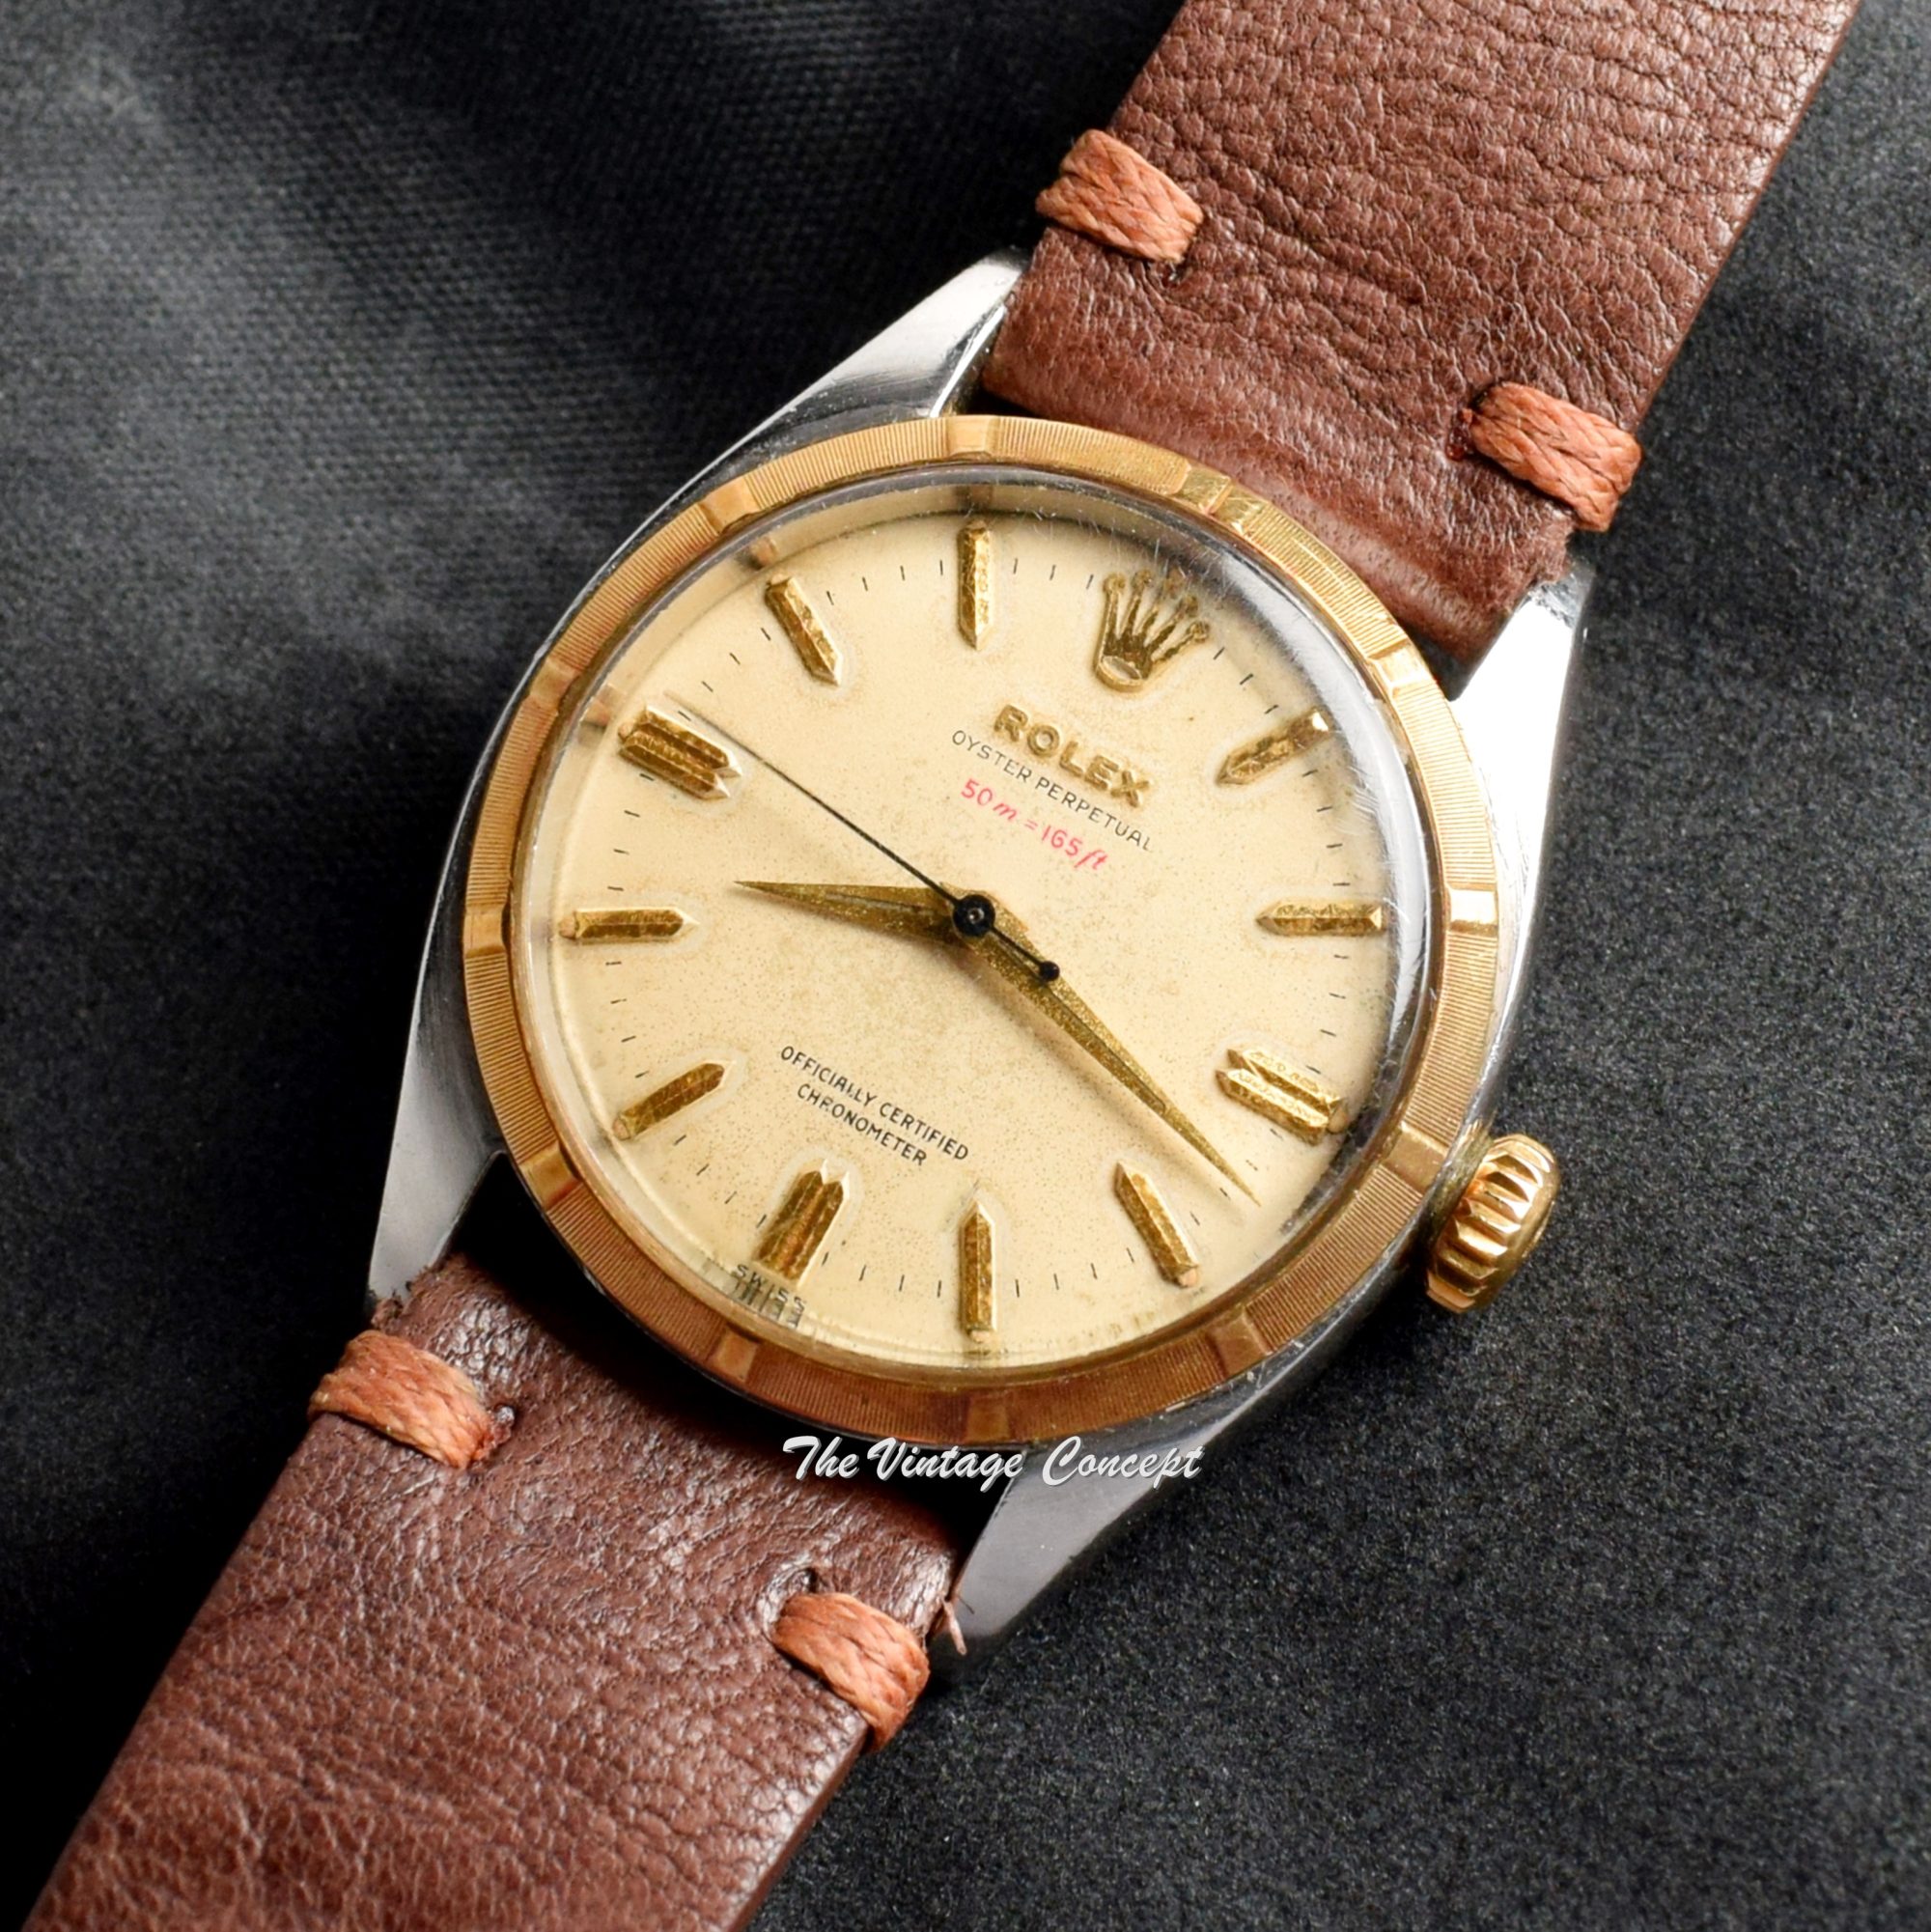 Rolex Oyster Perpetual Red Depth "50m=165ft" 6581 (SOLD) - The Vintage Concept